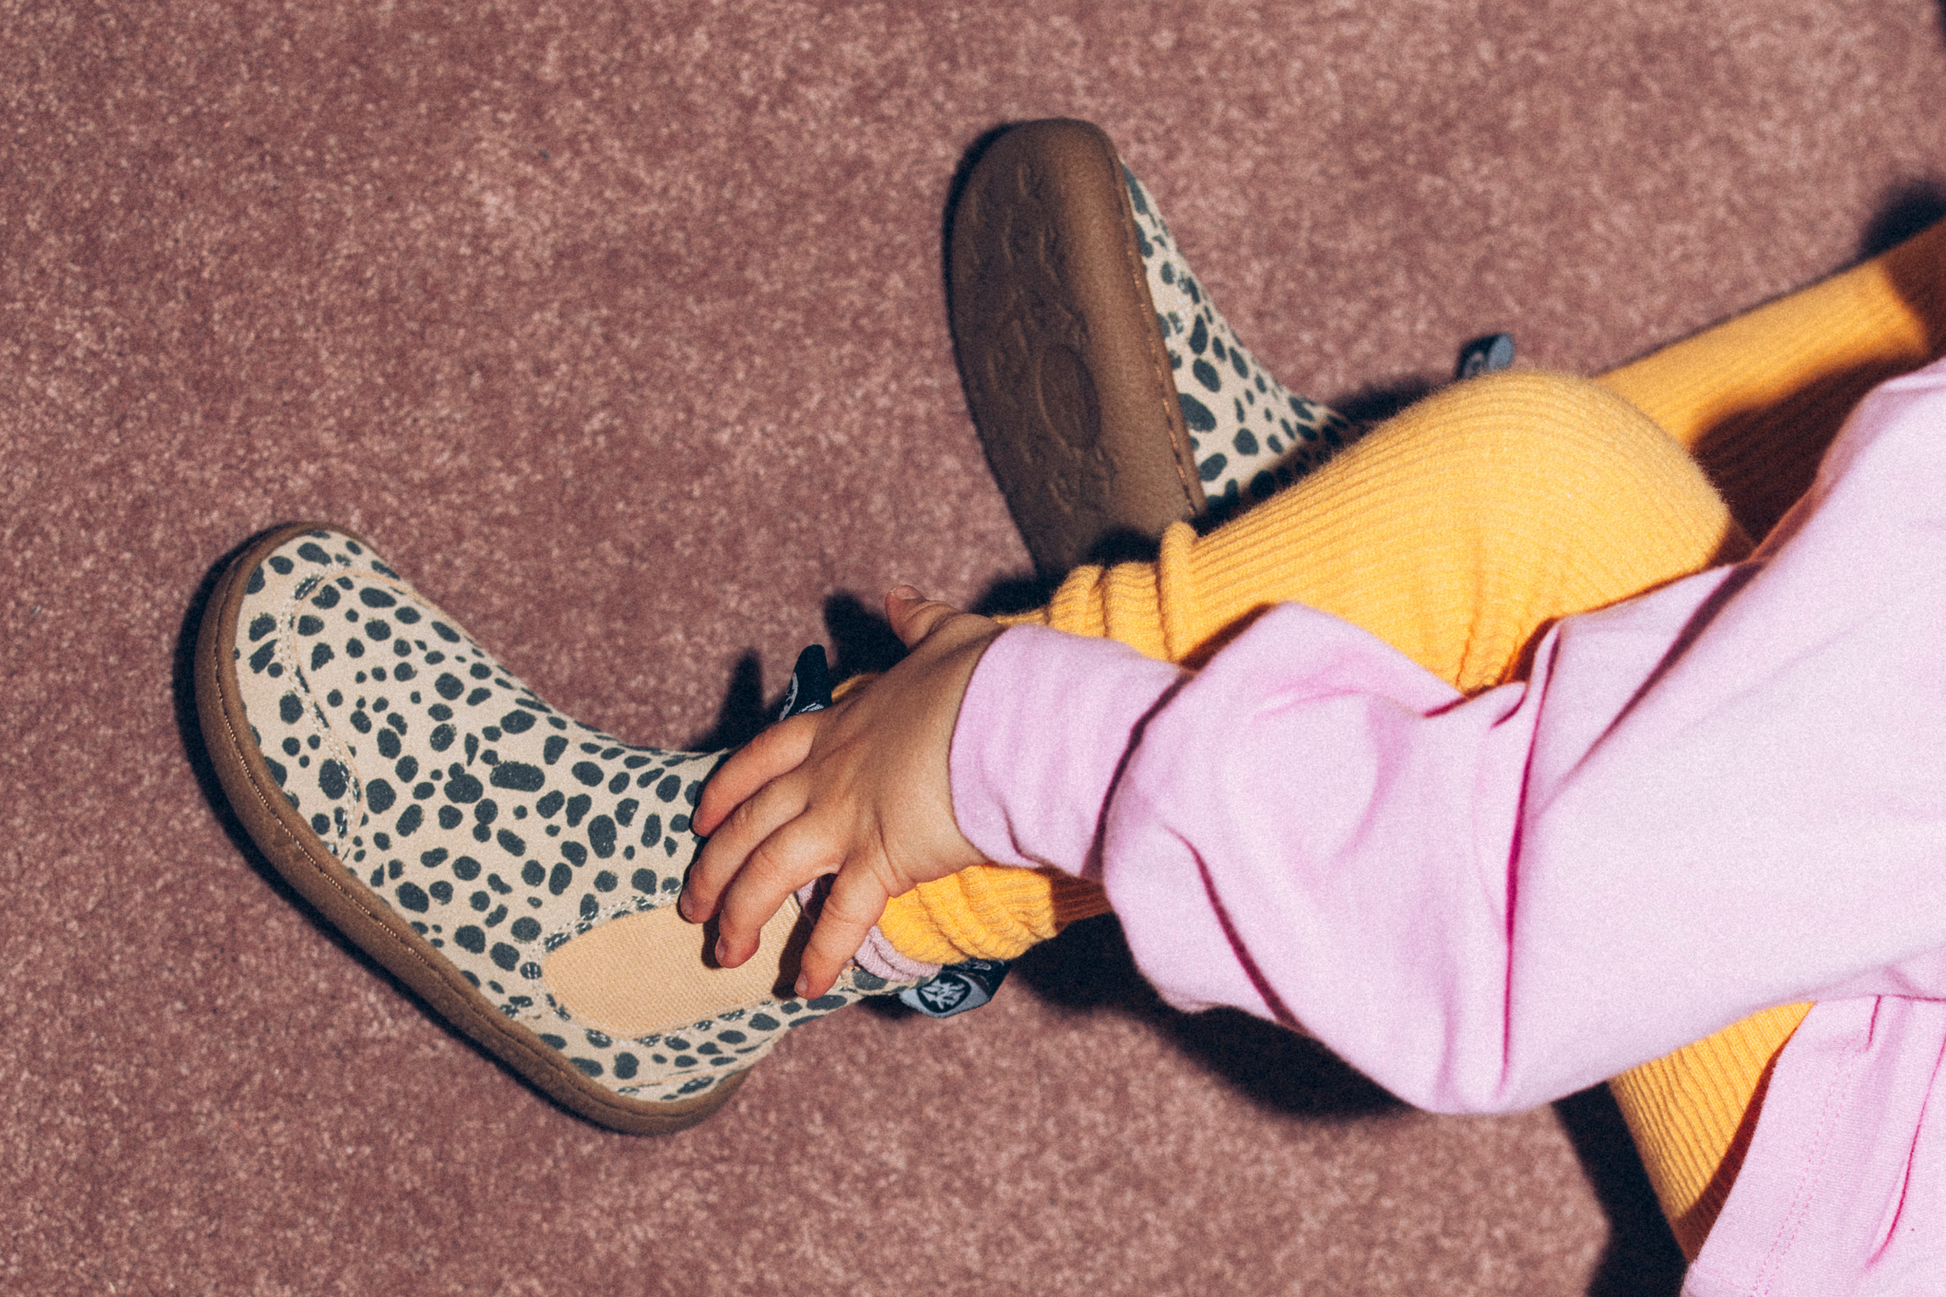 CHILD TOUCHING CHEETAH BOOTS WITH THEIR HAND